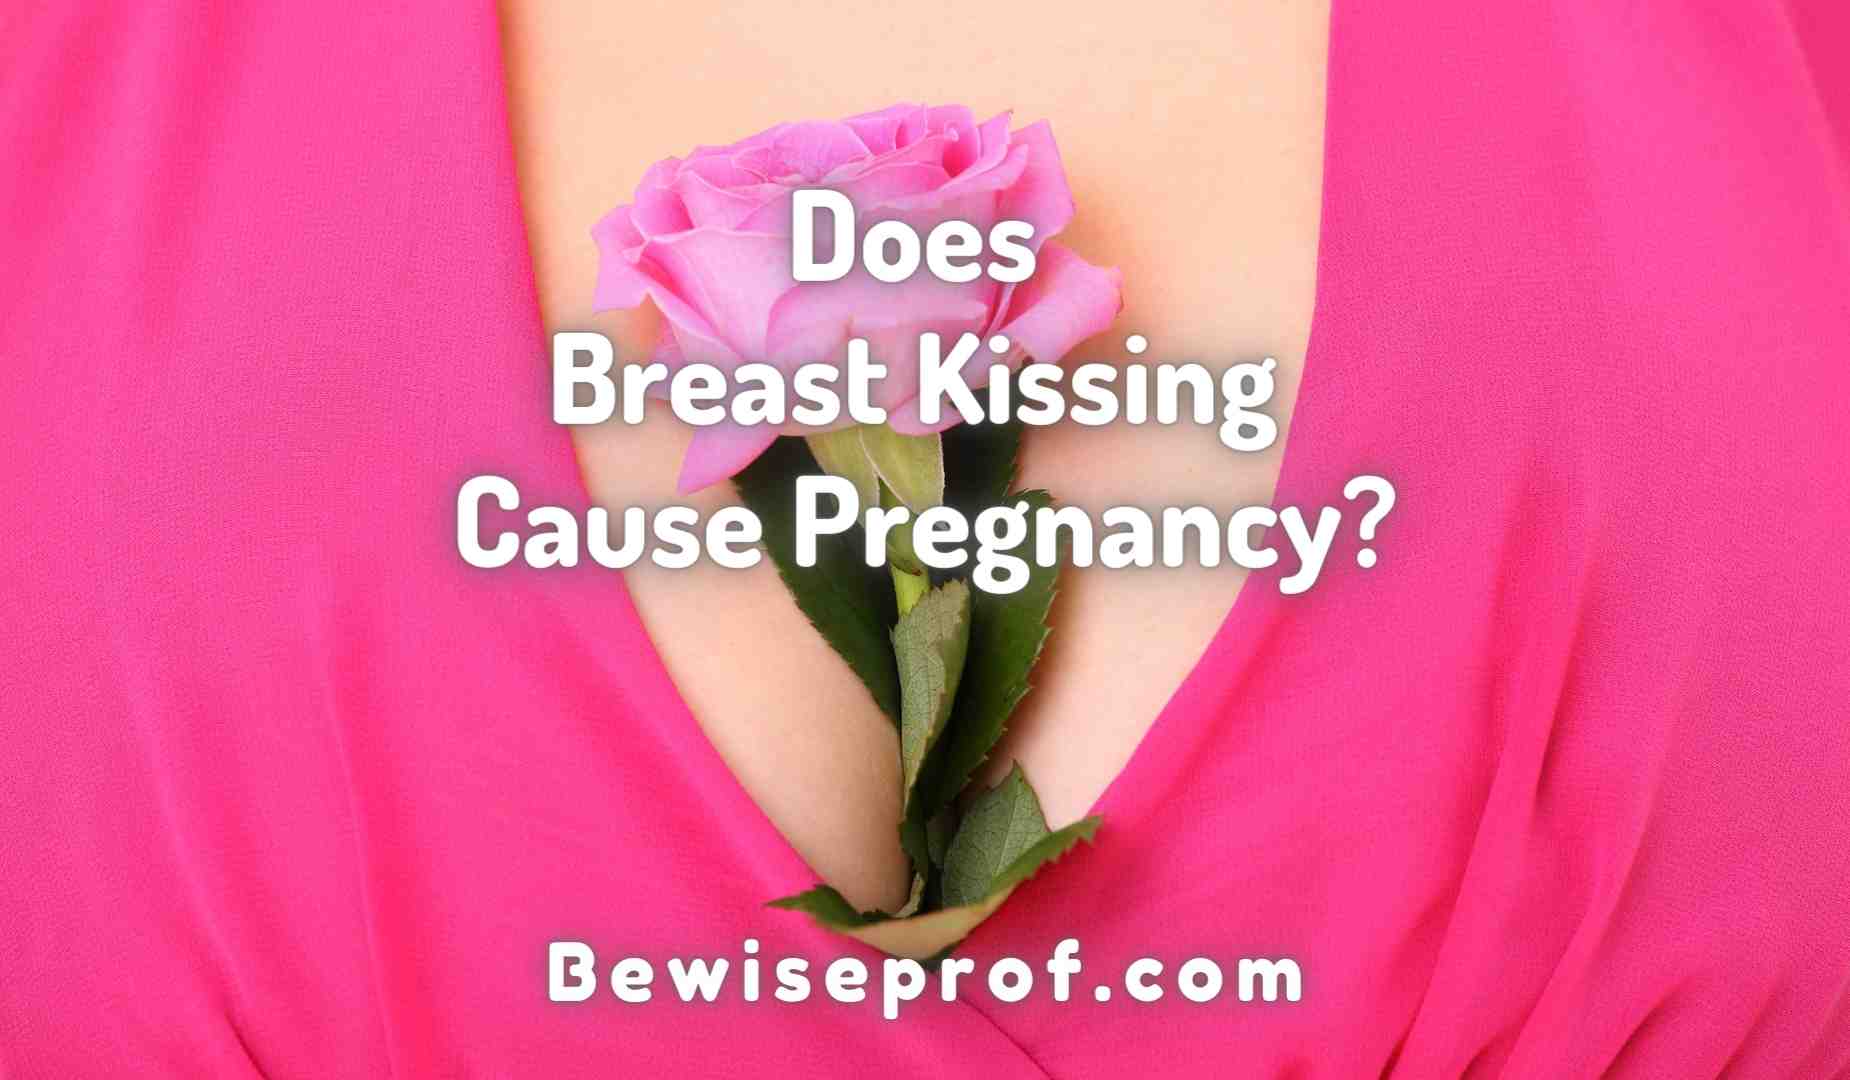 Does Breast Kissing Cause Pregnancy?